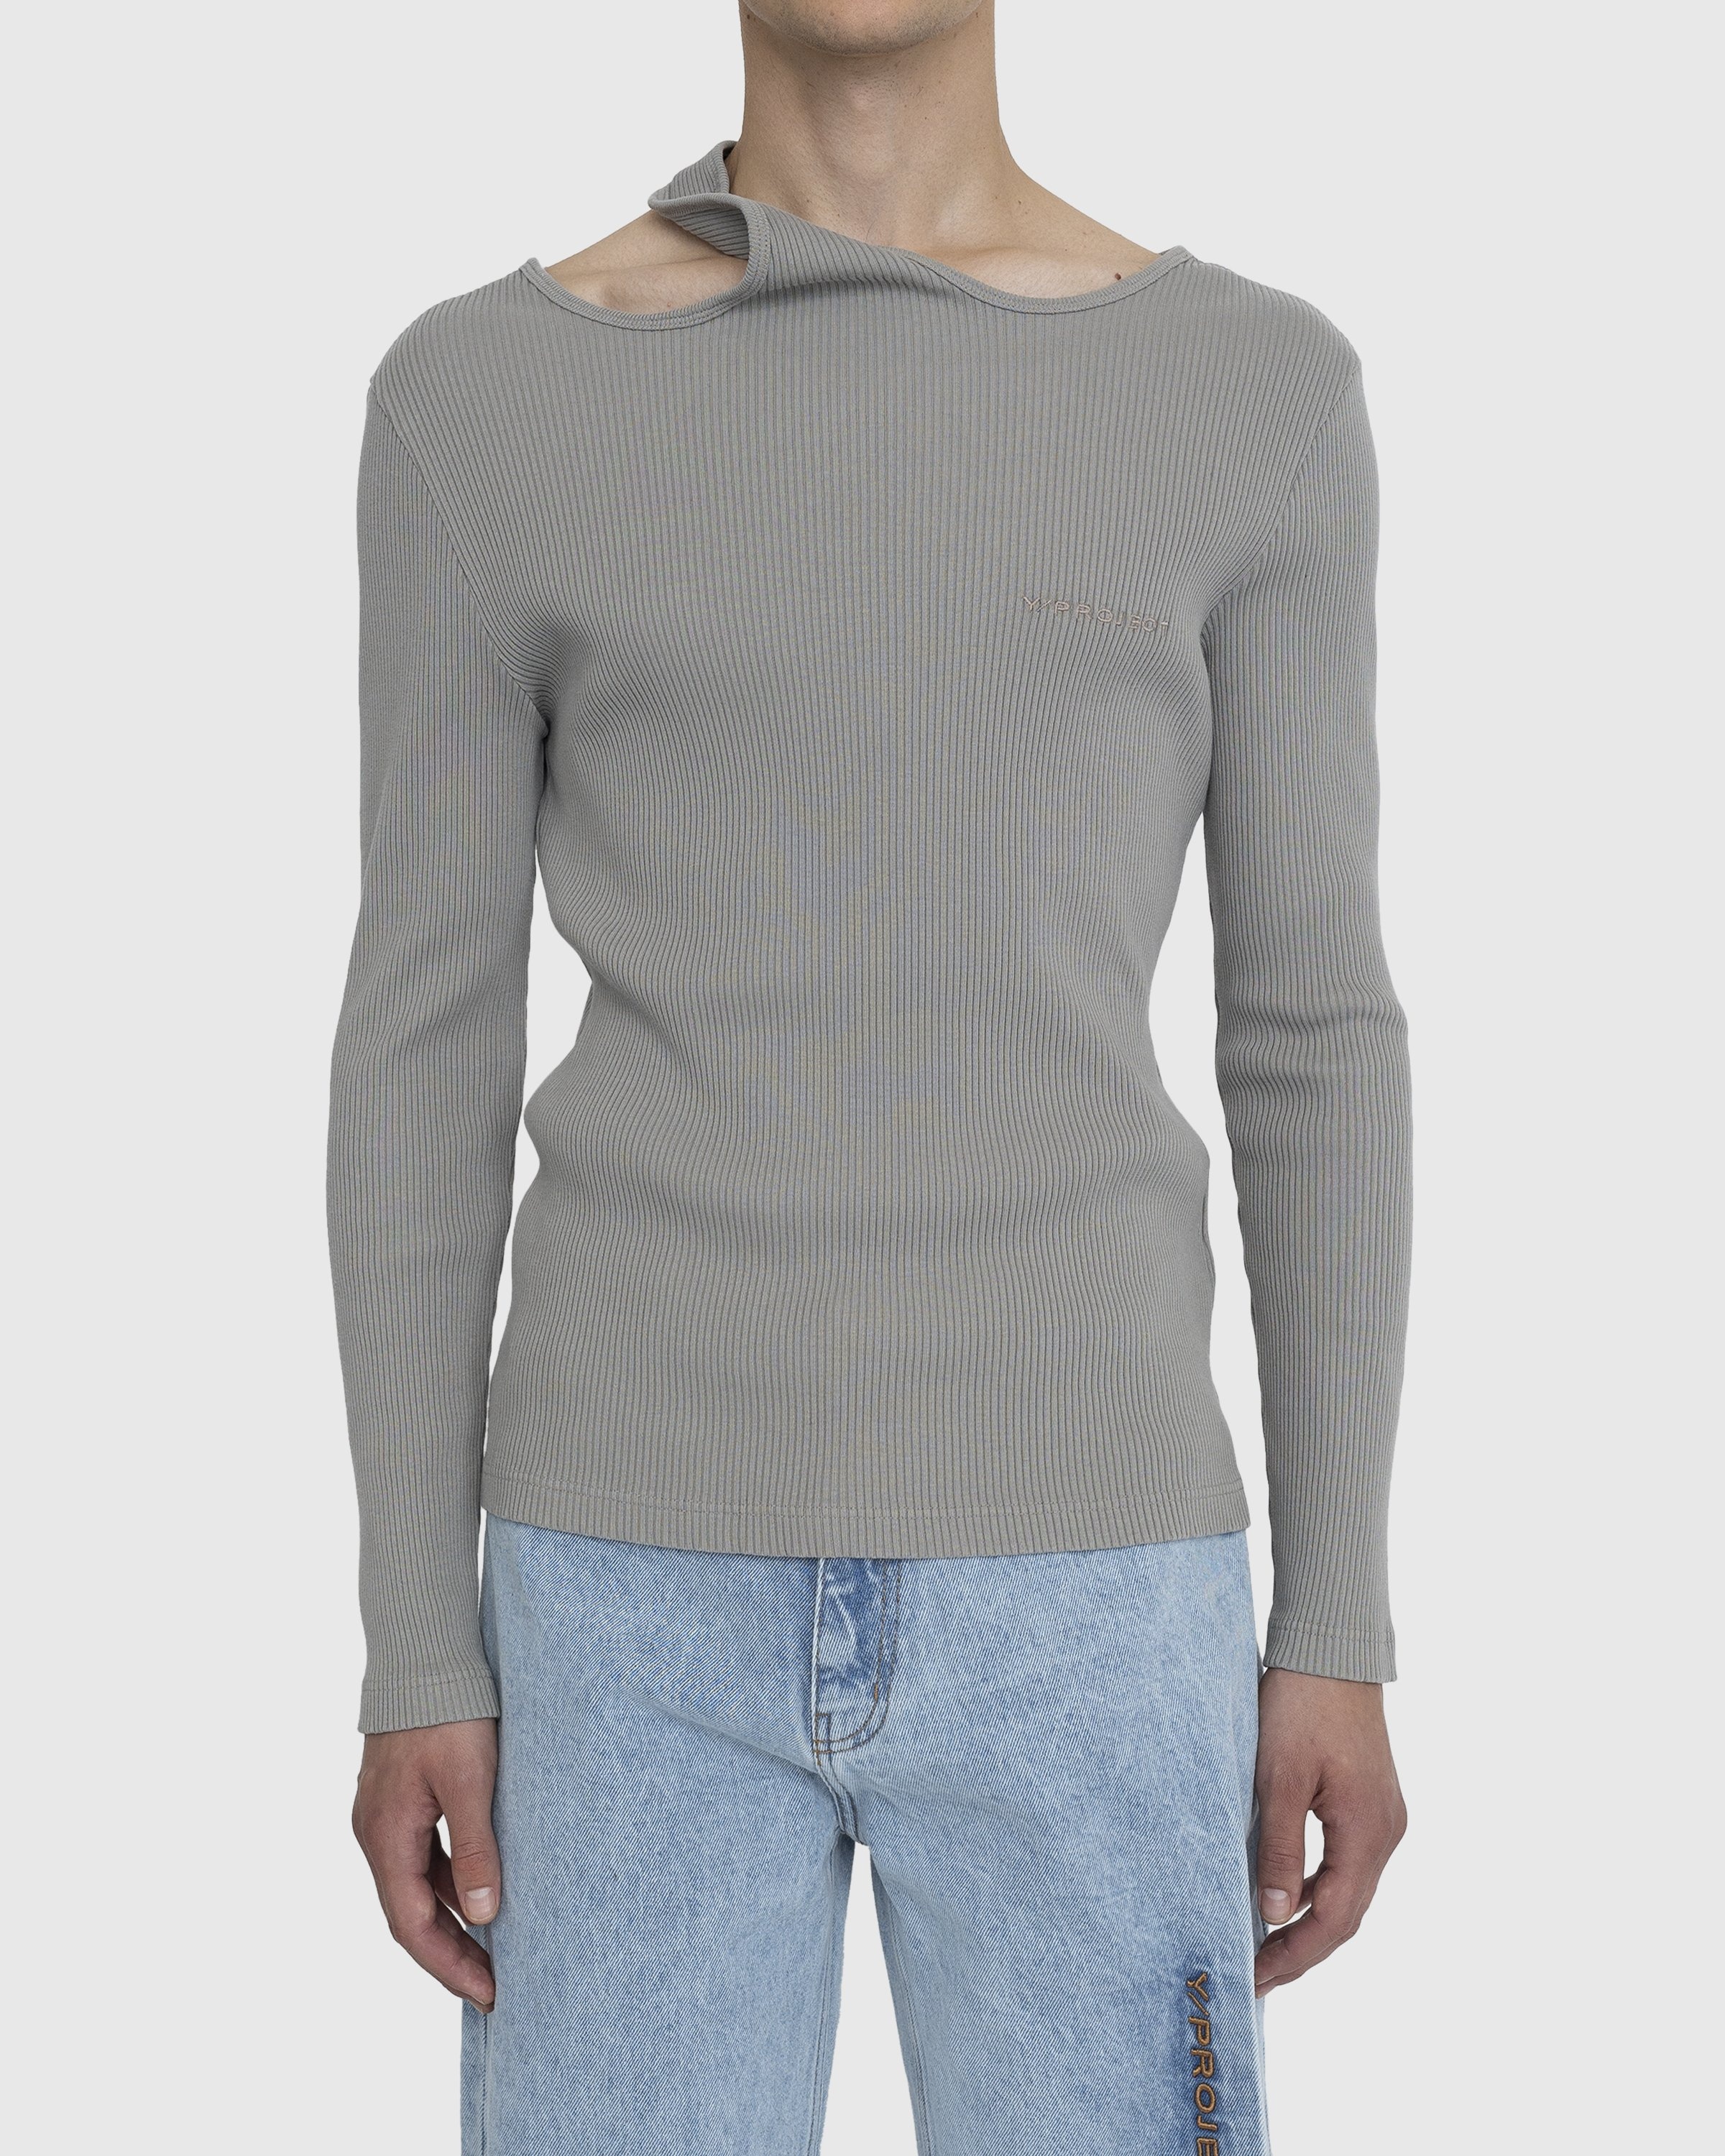 Y/Project – Classic Double Collar T-Shirt Taupe - T-shirts - Grey - Image 2